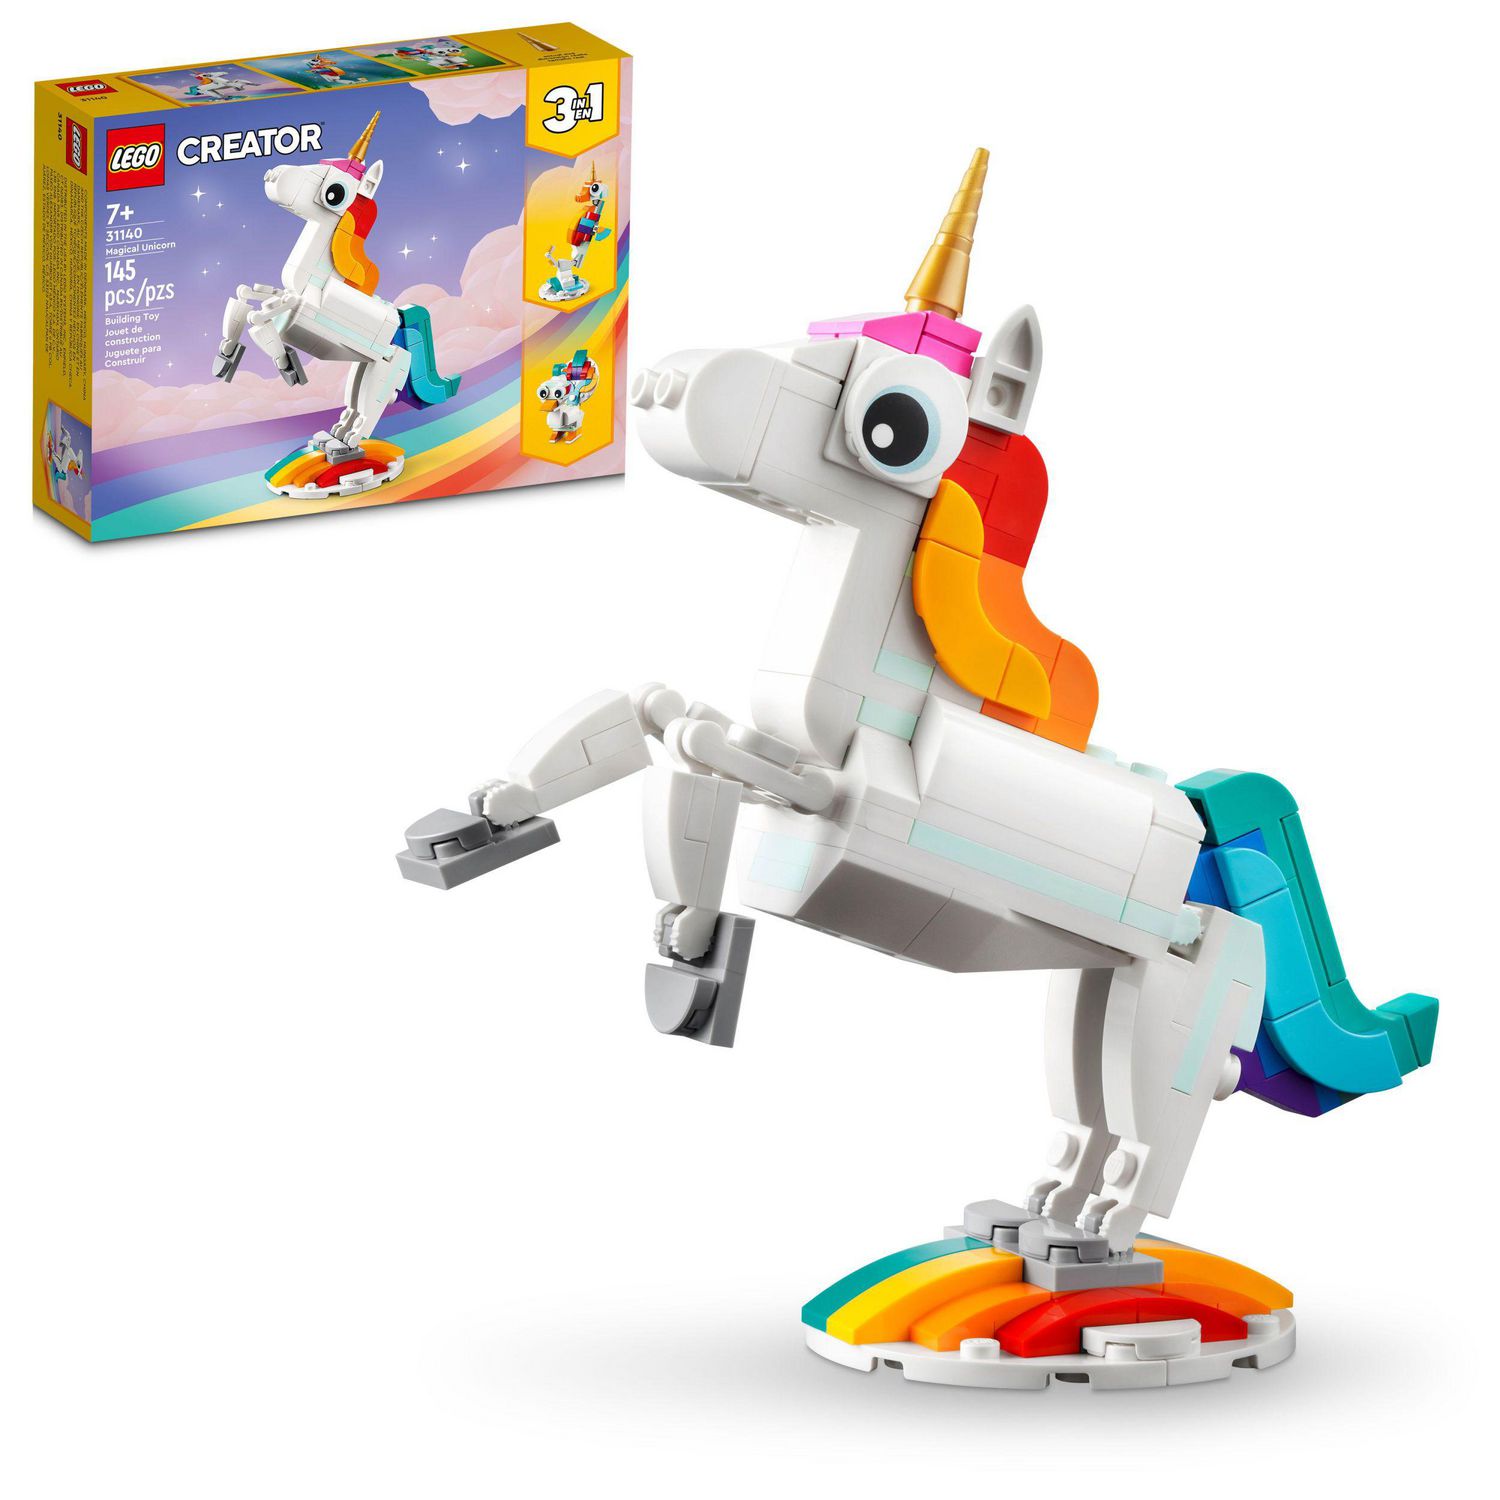 LEGO Creator 3 in 1 Magical Unicorn Toy Transforms to Seahorse or